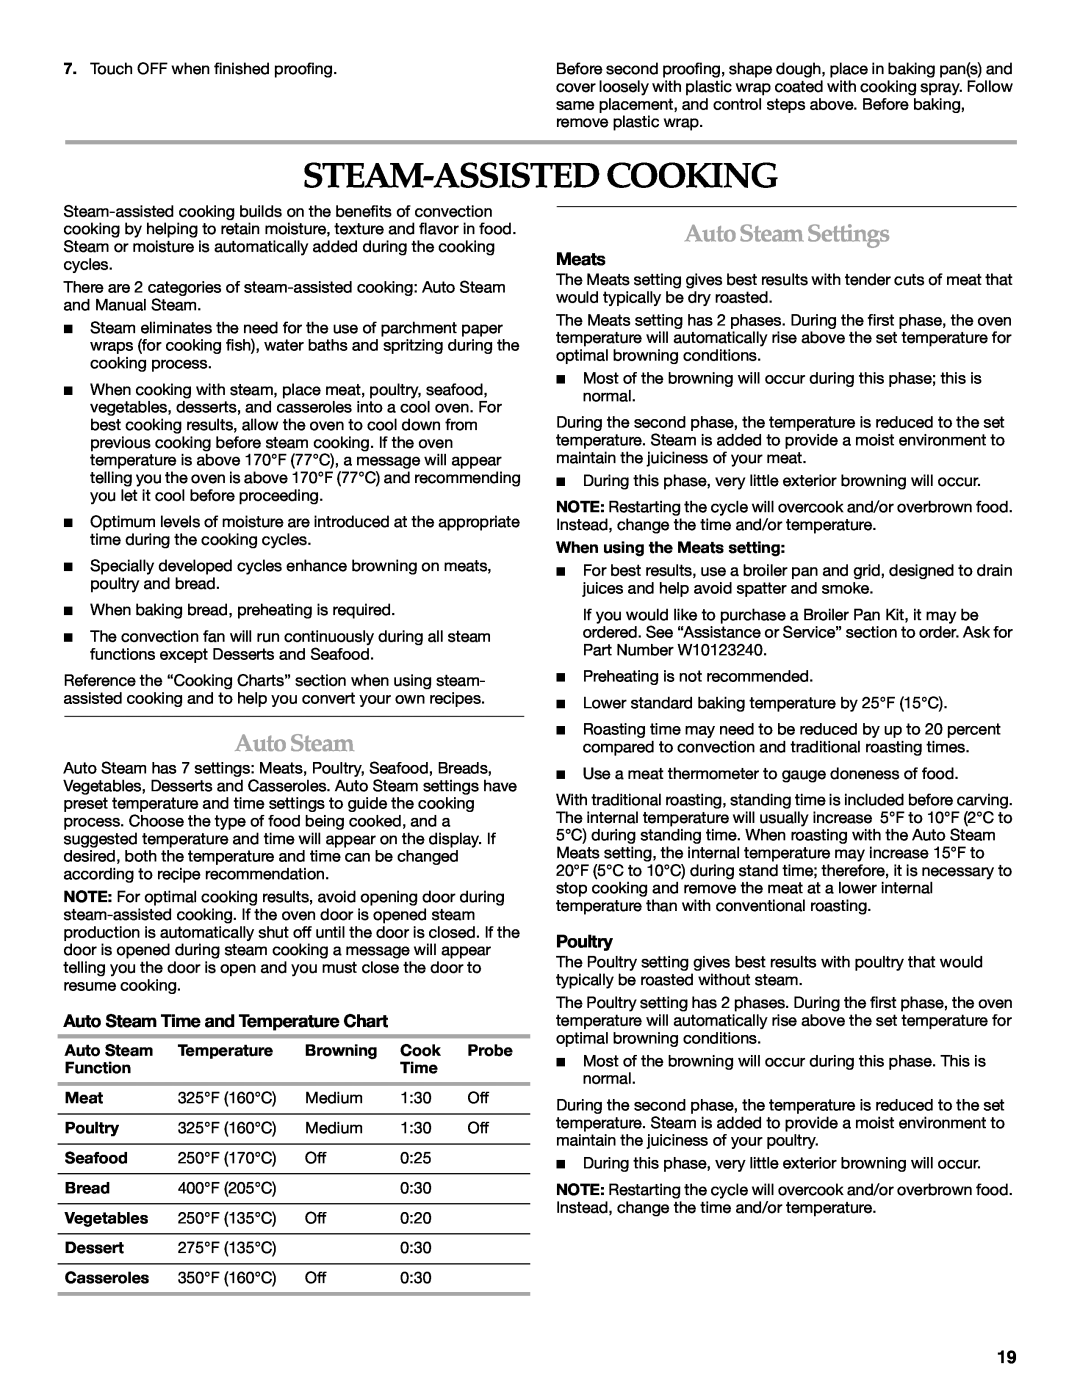 KitchenAid KEHU309 Steam-Assisted Cooking, AutoSteamSettings, Auto Steam Time and Temperature Chart, Meats, Poultry 